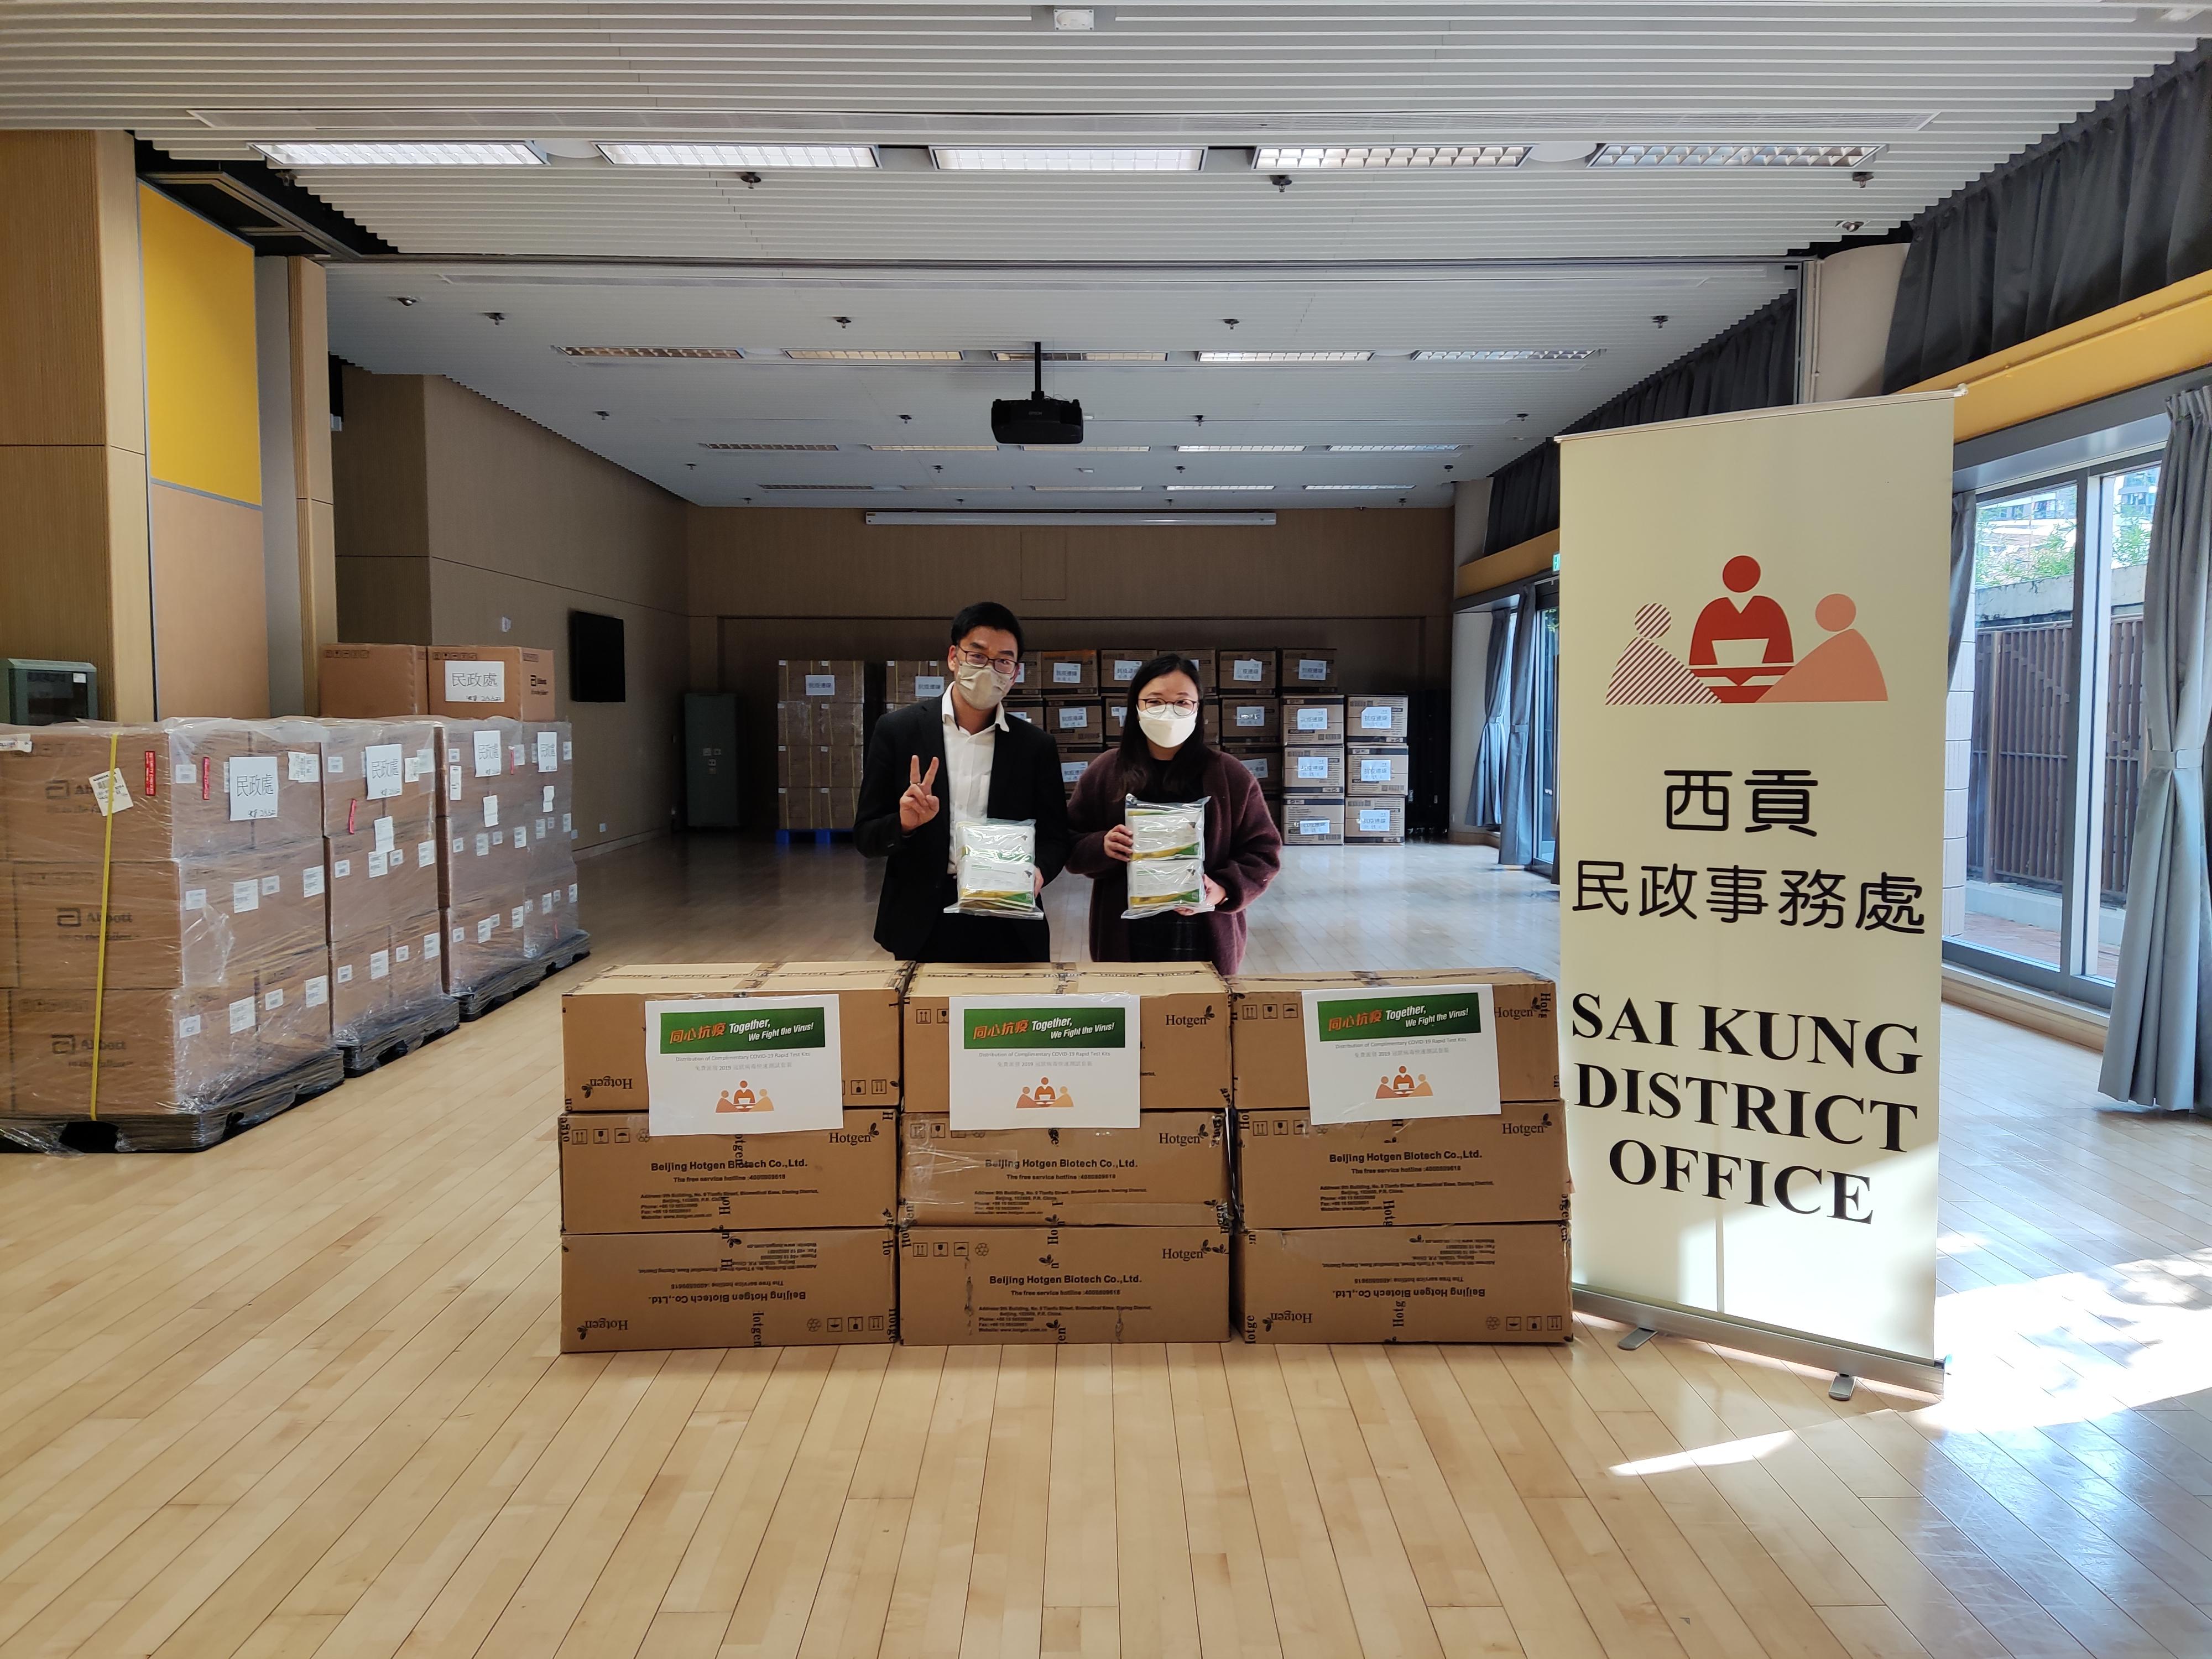 The Sai Kung District Office today (March 11) distributed COVID-19 rapid test kits to households, cleansing workers and property management staff living and working in King Ming Court for voluntary testing through the property management company.